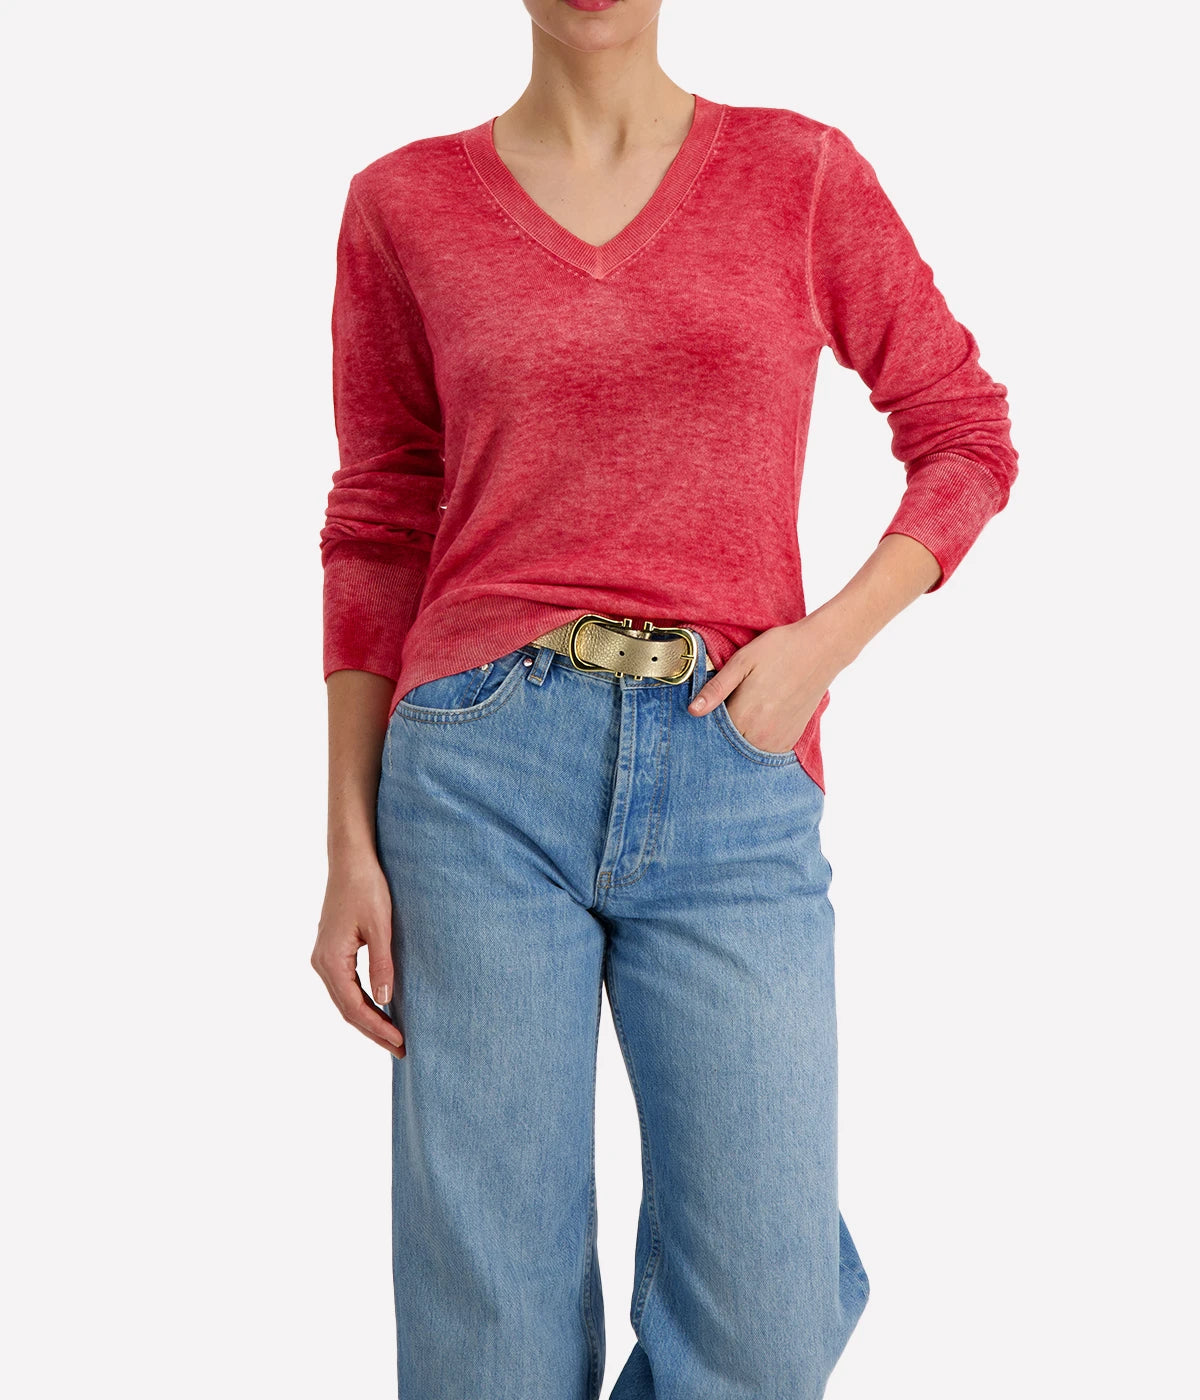 V-Neck wool & cashmere lightweight long sleeve blend pullover by Avant Toi.